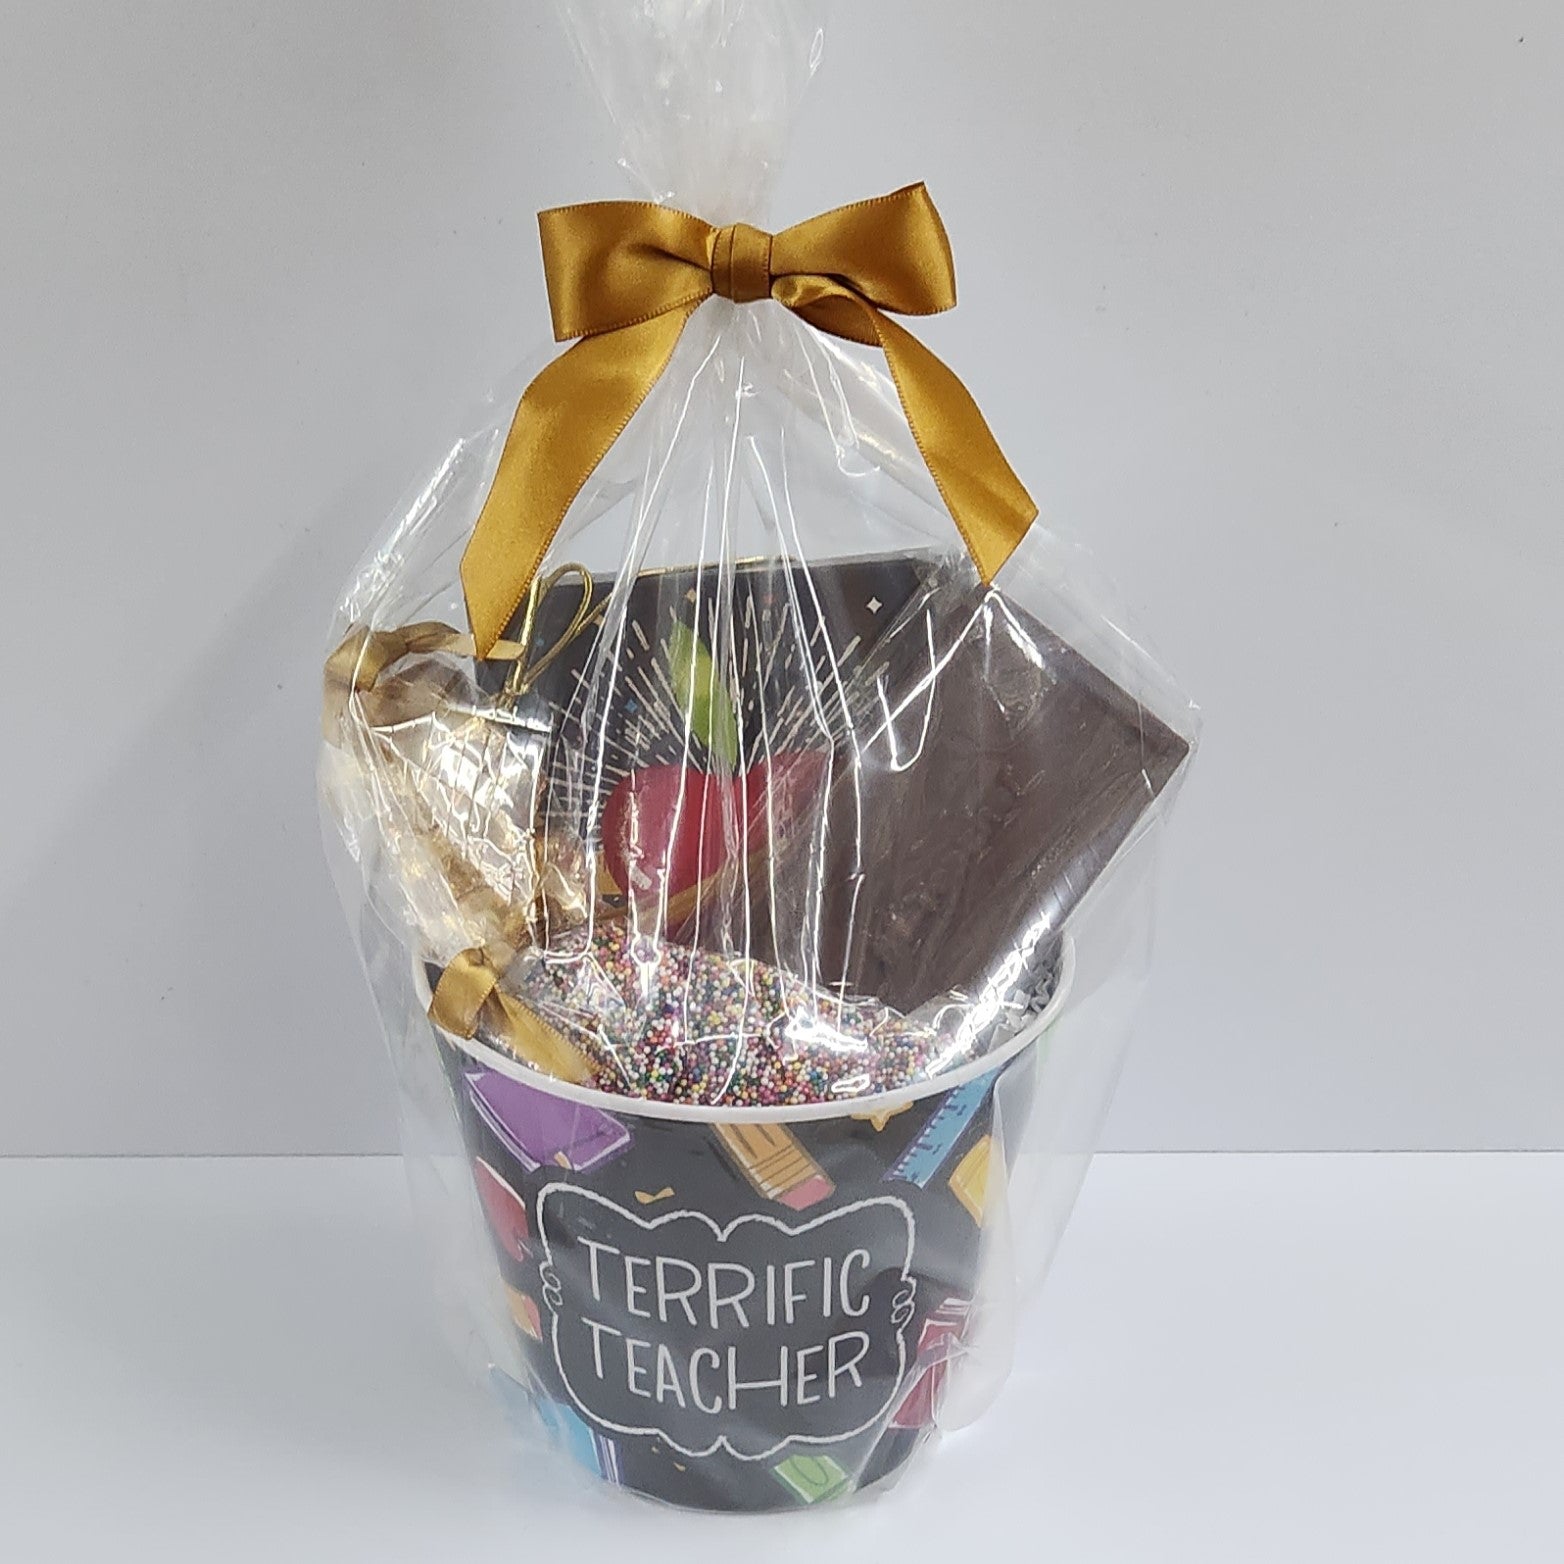 Terrific Teacher Chocolate Gift Basket from Stage Stop Candy